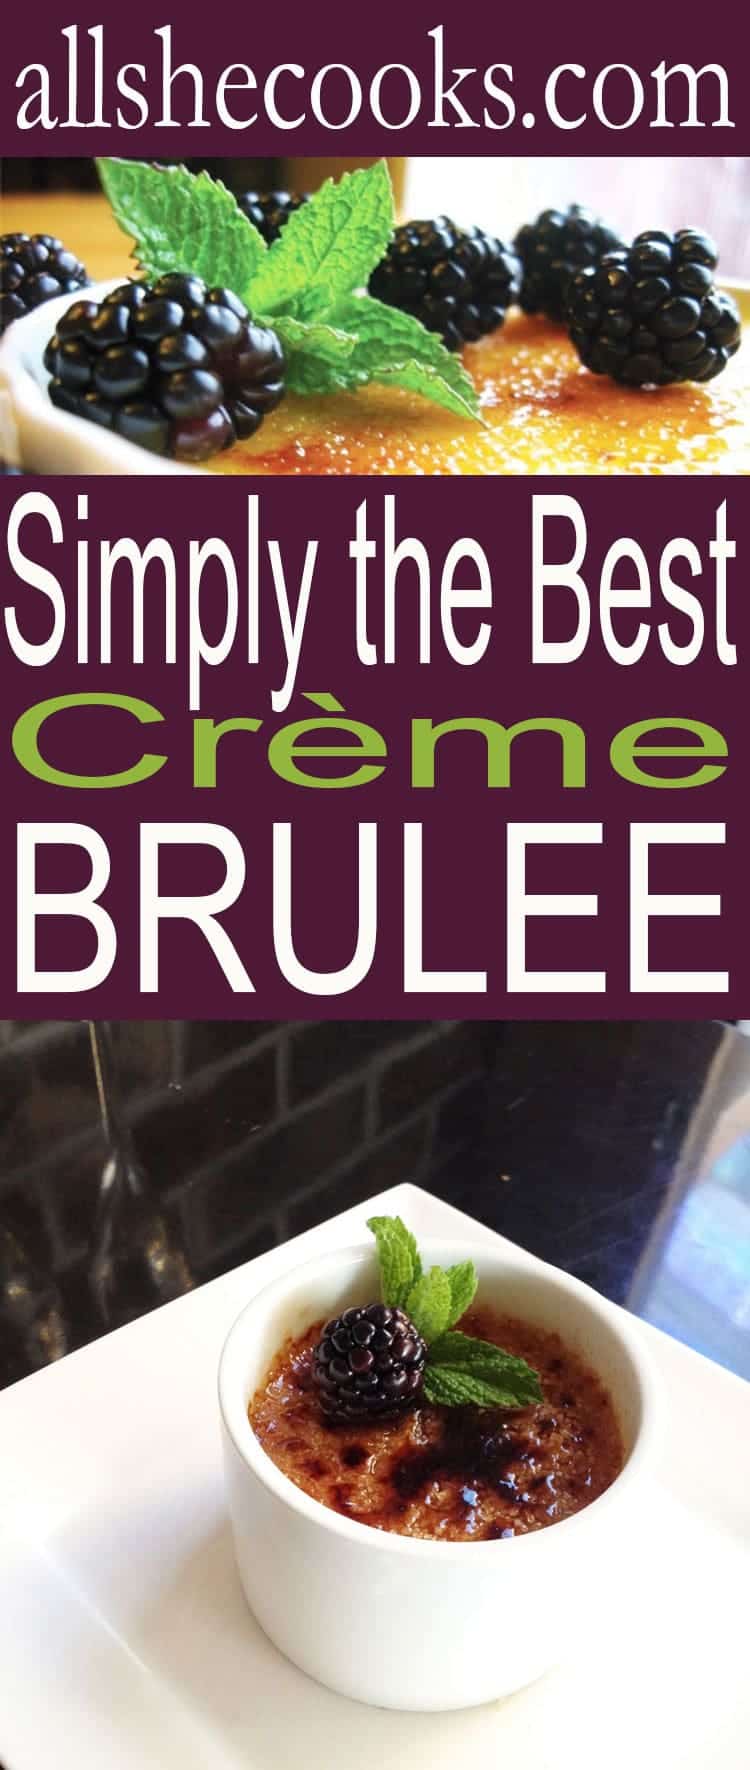 Learn how to make Crème Brulee and wow your sweetie or guests with this traditional French dessert. Creamy and divine, this dessert will leave you in awe. Easy Creme Brulee recipe to make at home.